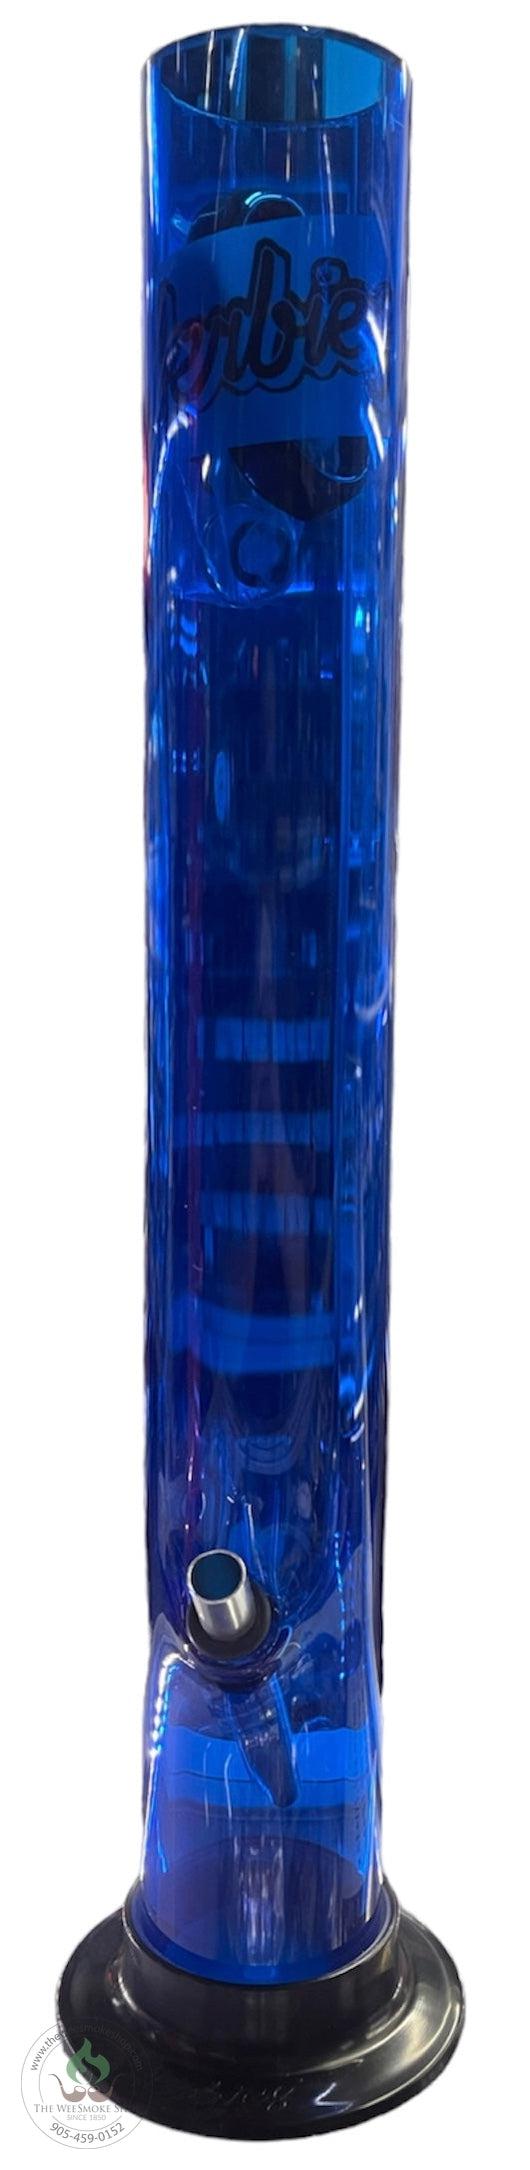 Herbies 15" Acrylic Straight Shooter Bong - Blue - The Wee Smoke Shop